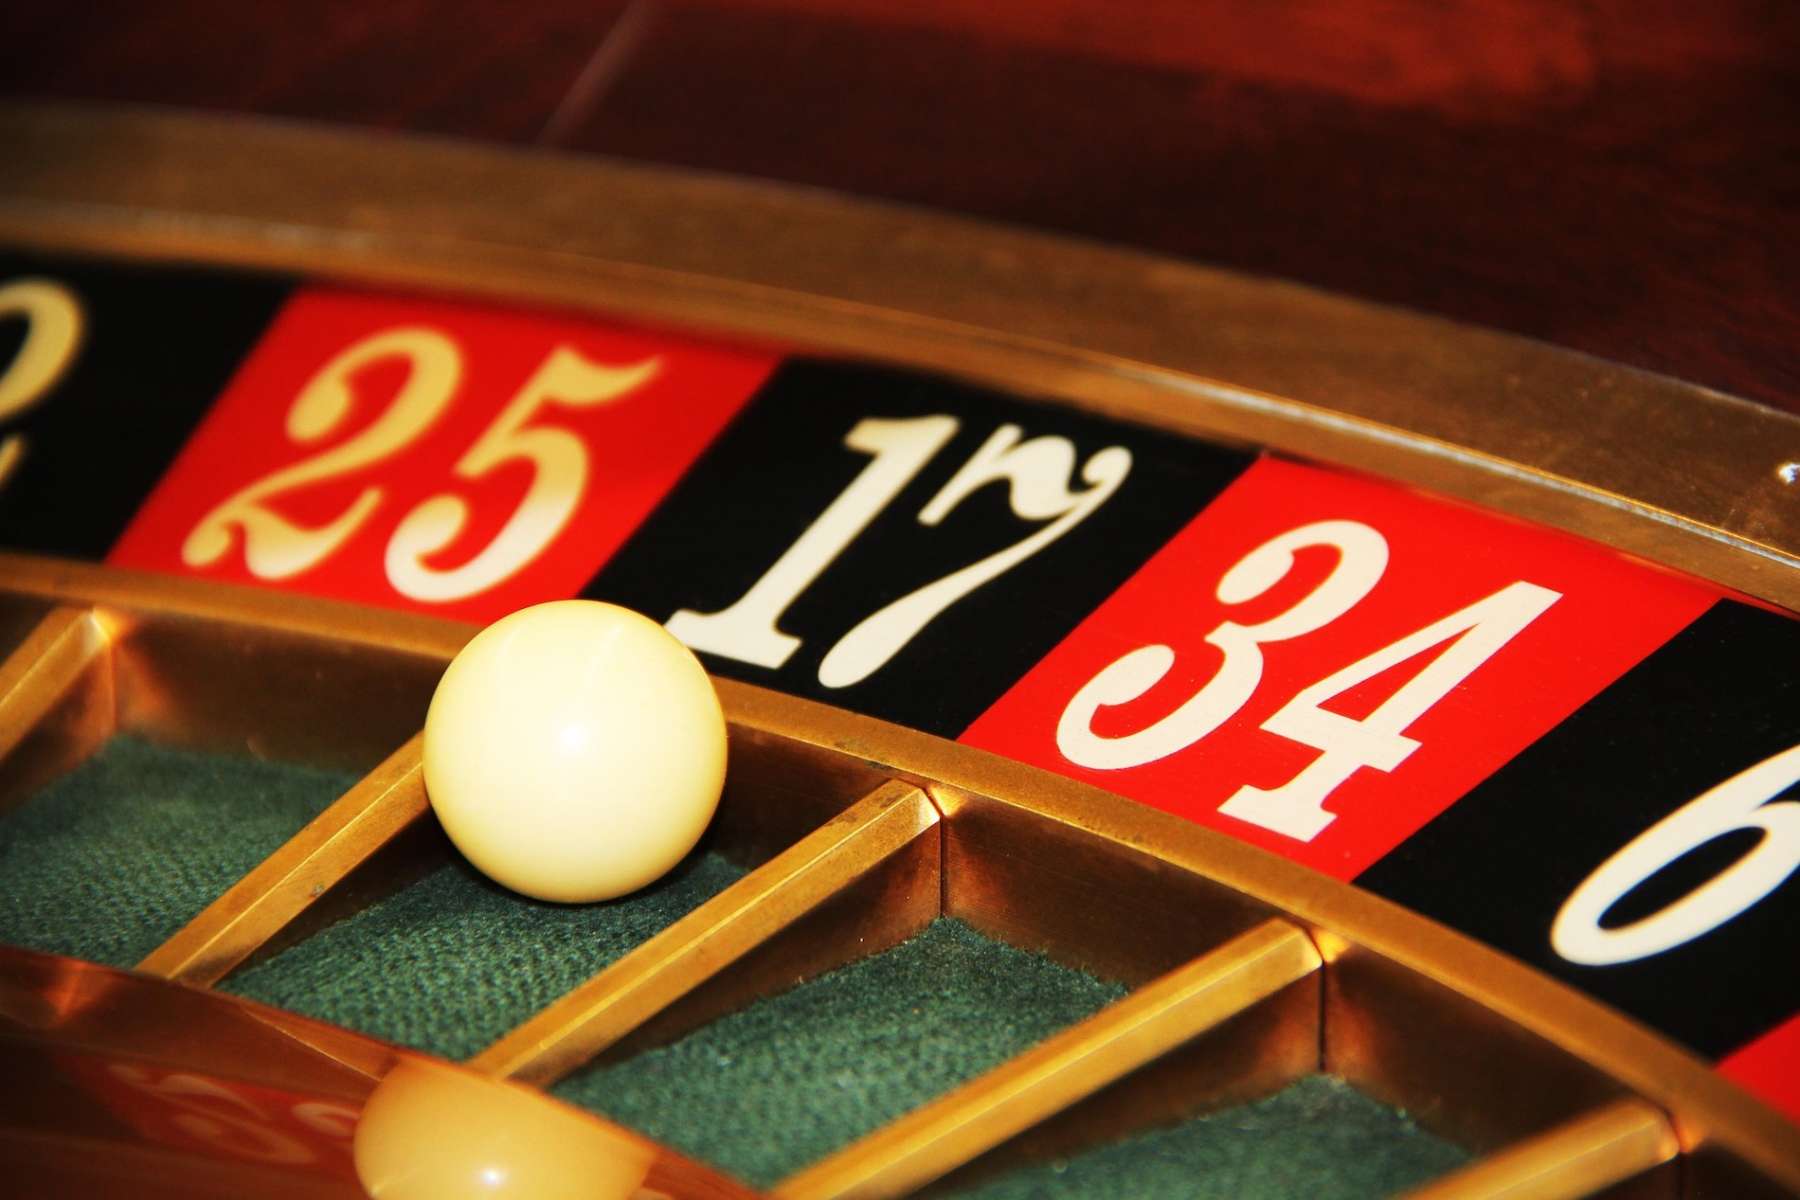 New online Casinos - Pros and Cons It! Lessons From The Oscars